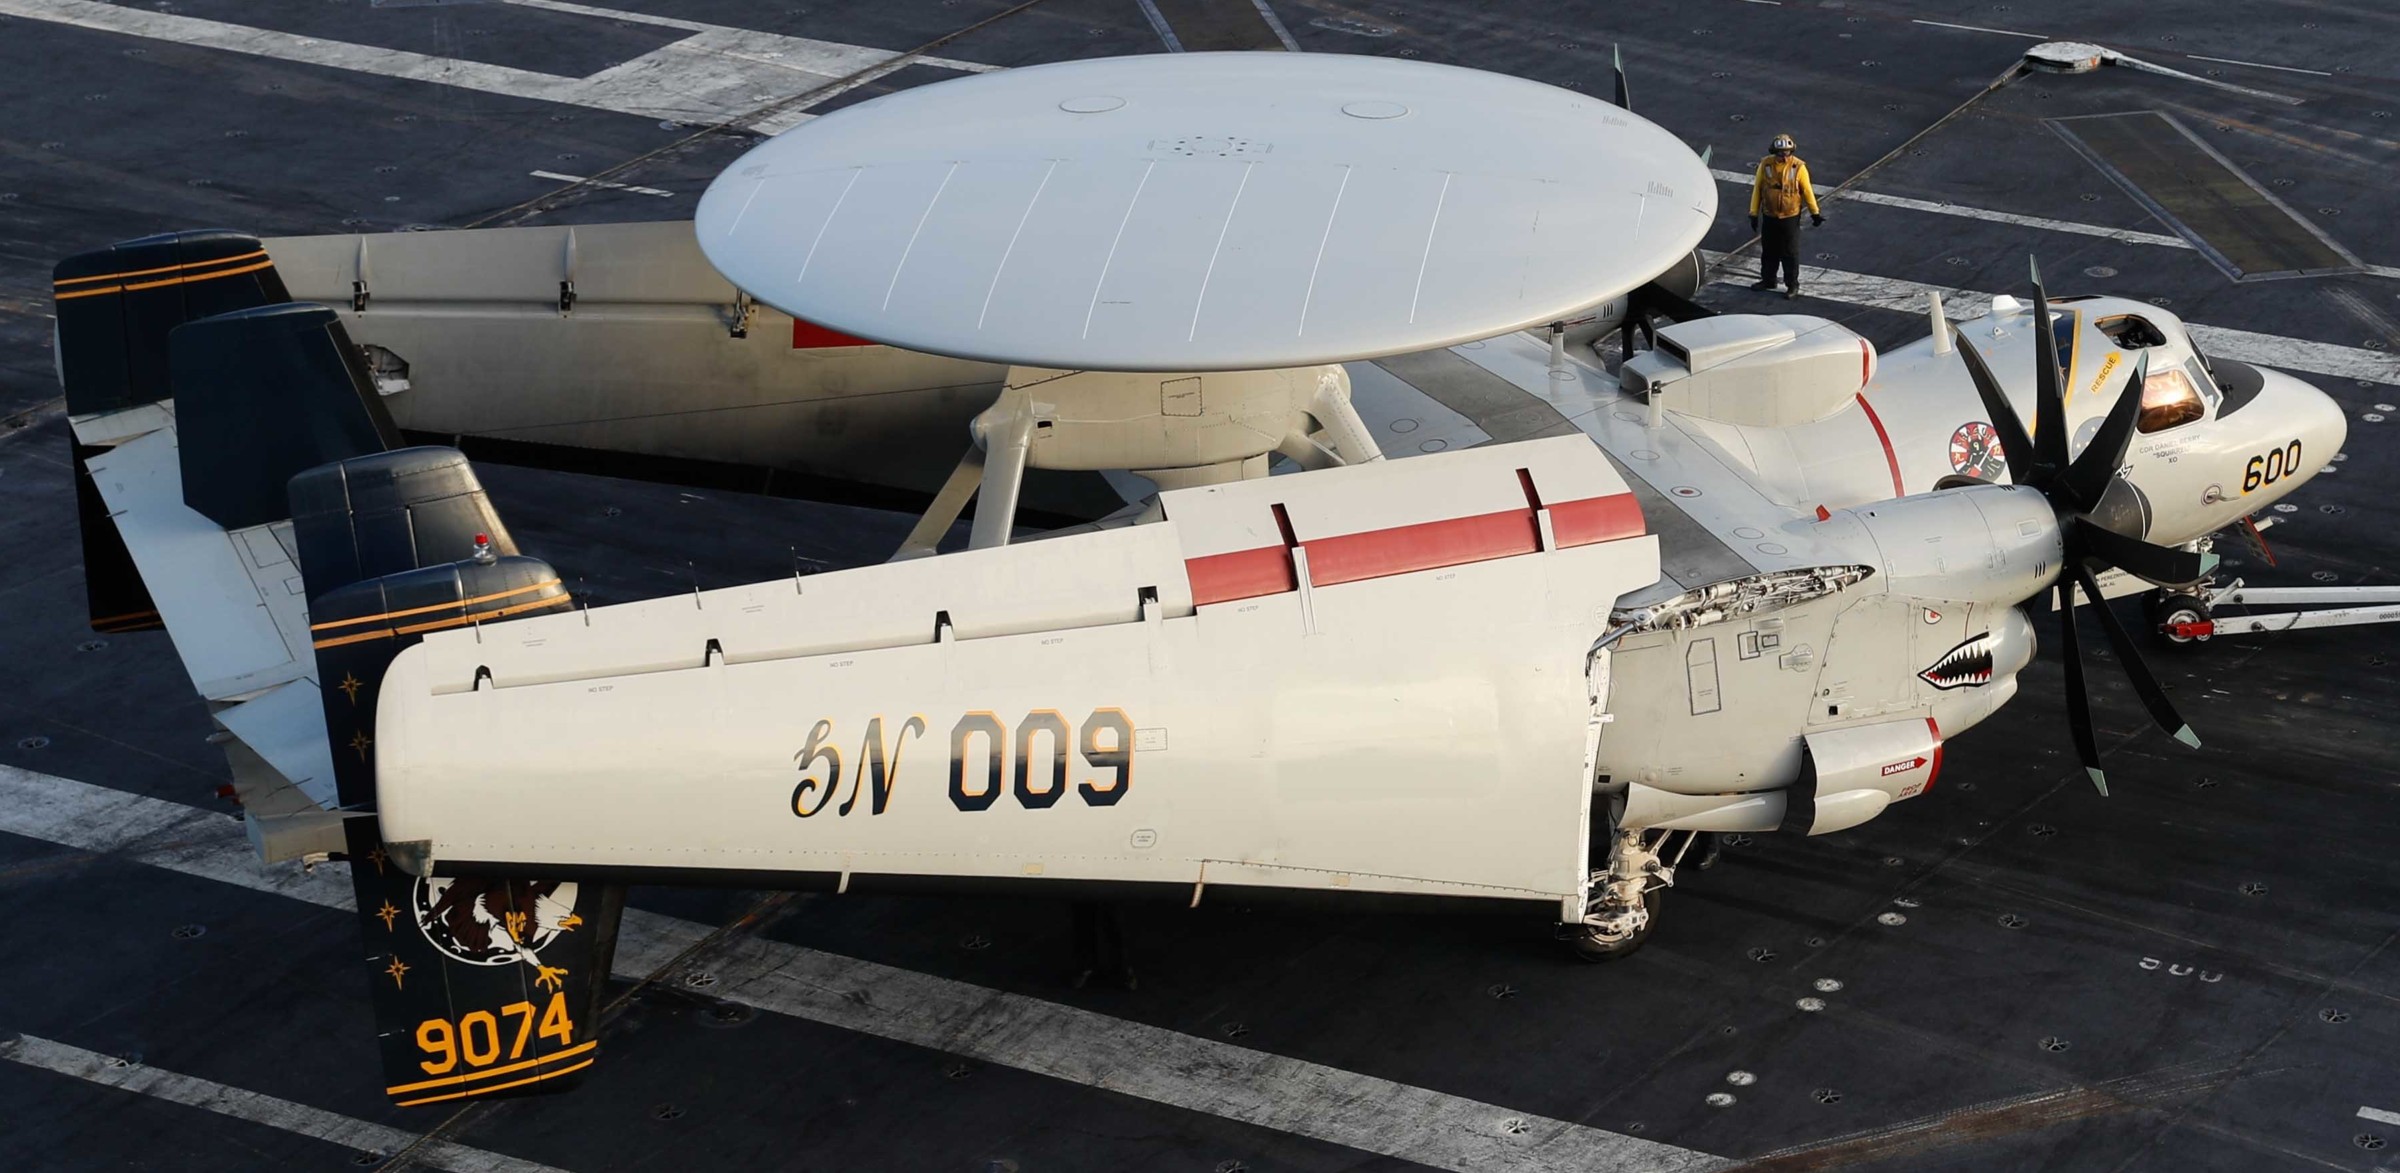 vaw-117 wallbangers airborne command and control squadron navy e-2d hawkeye cvw-9 uss abraham lincoln cvn-72 33